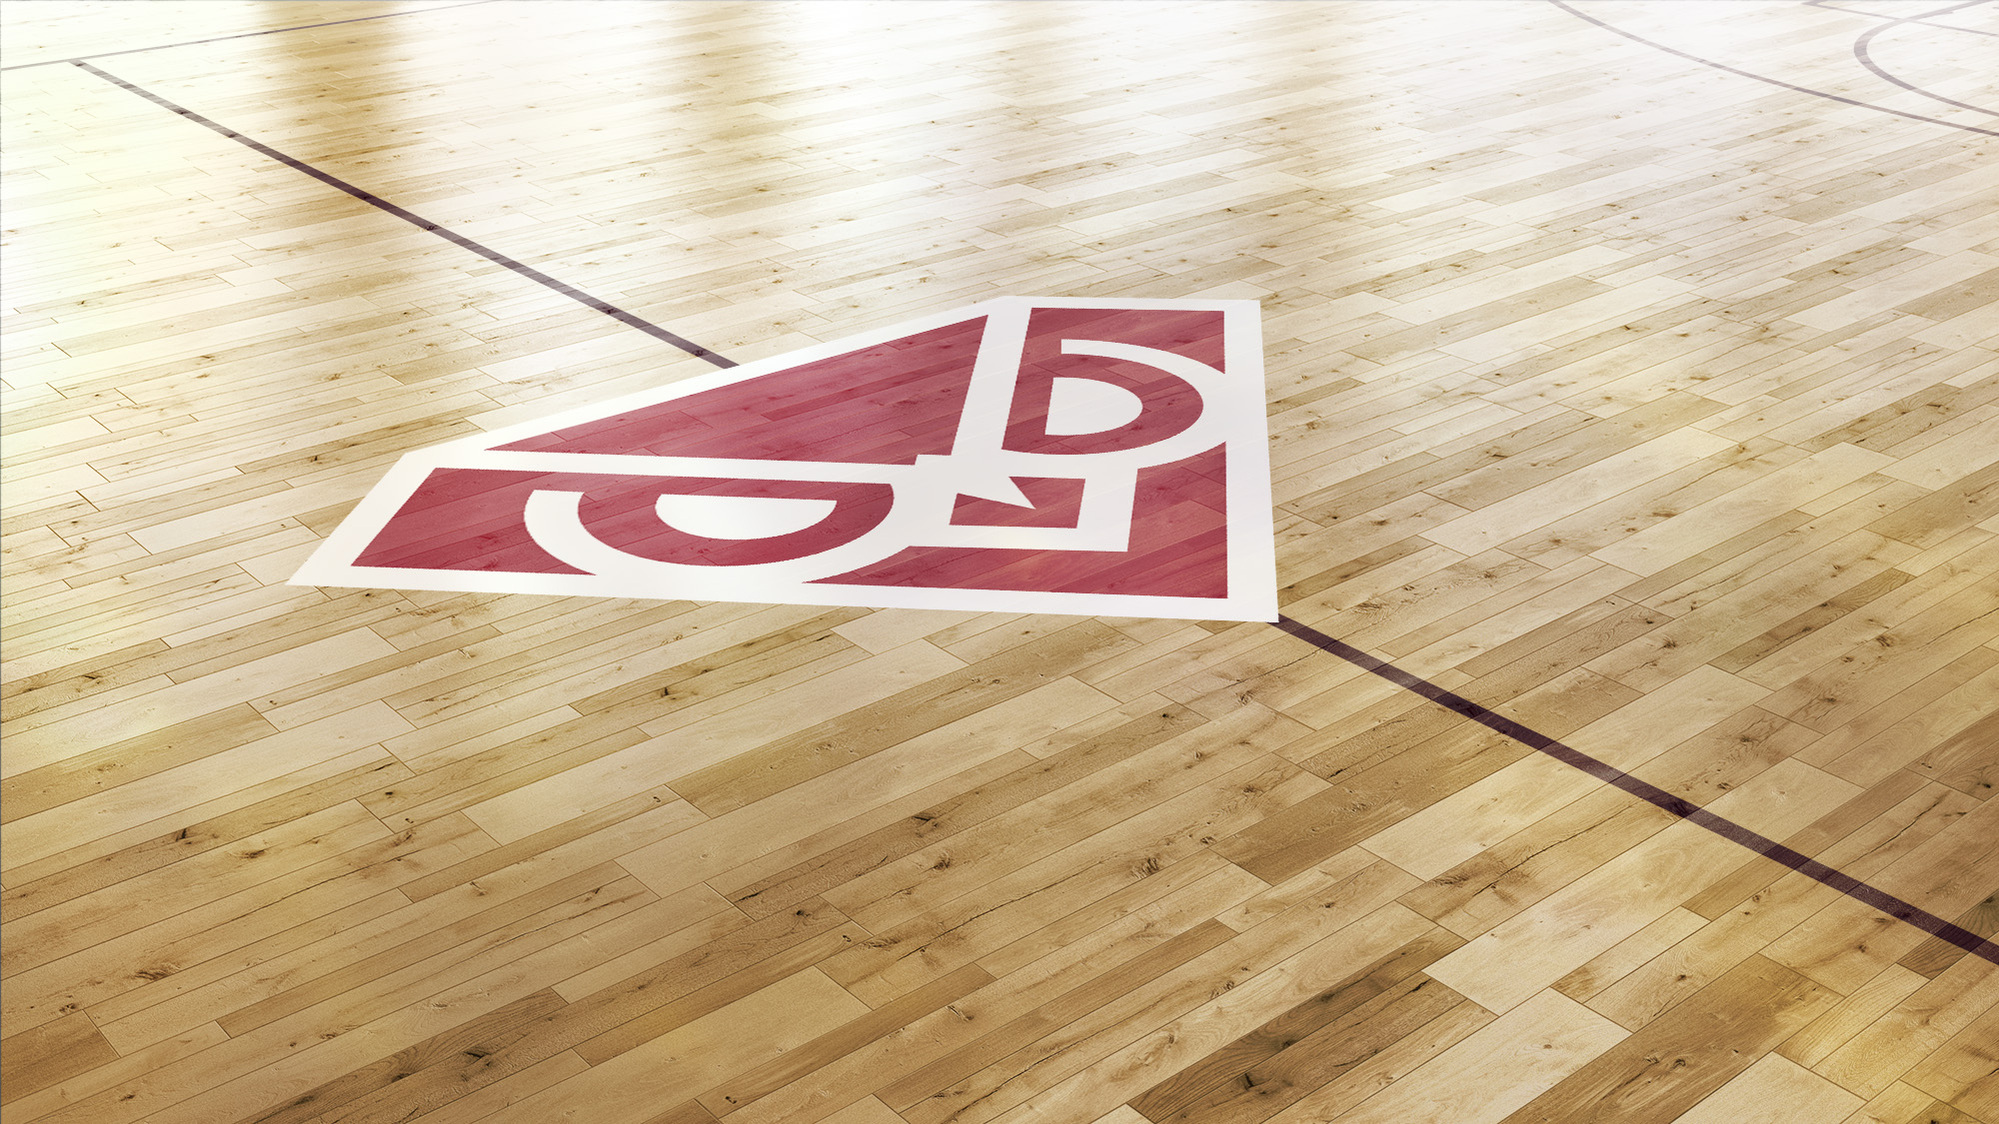 Proposed Temple Owl logo on basketball court